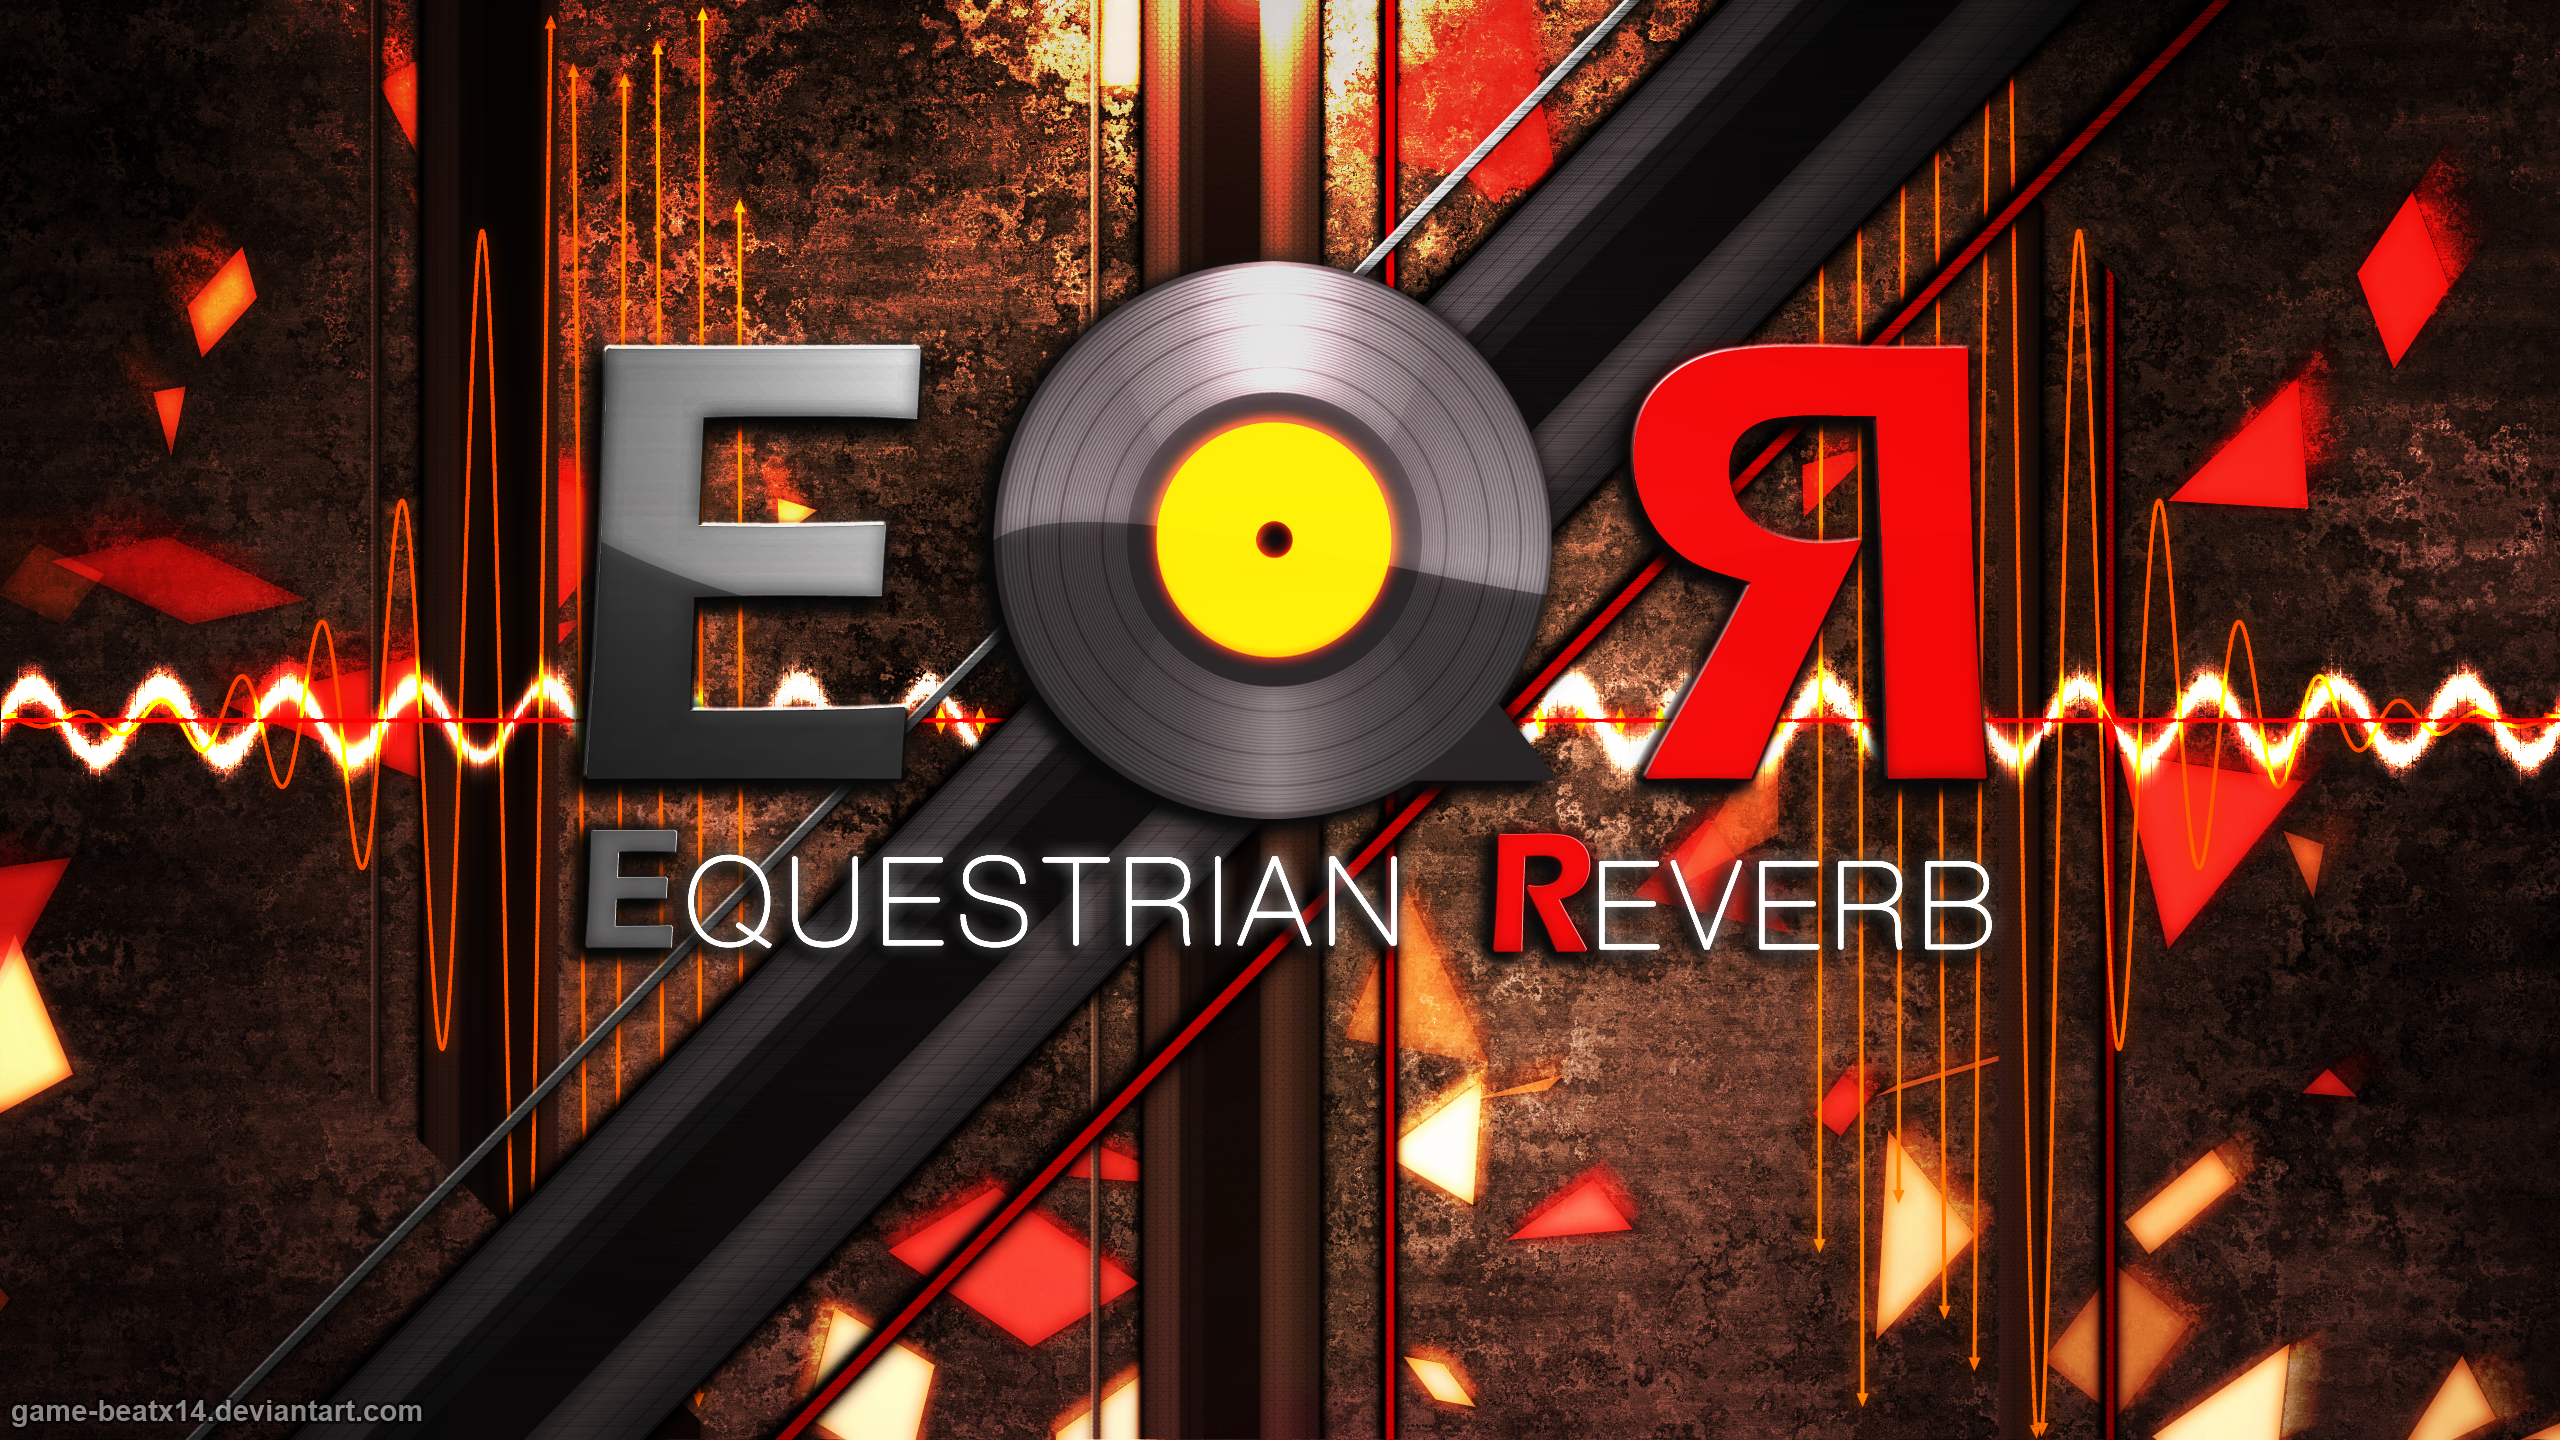 Equestrian Reverb by Game-BeatX14